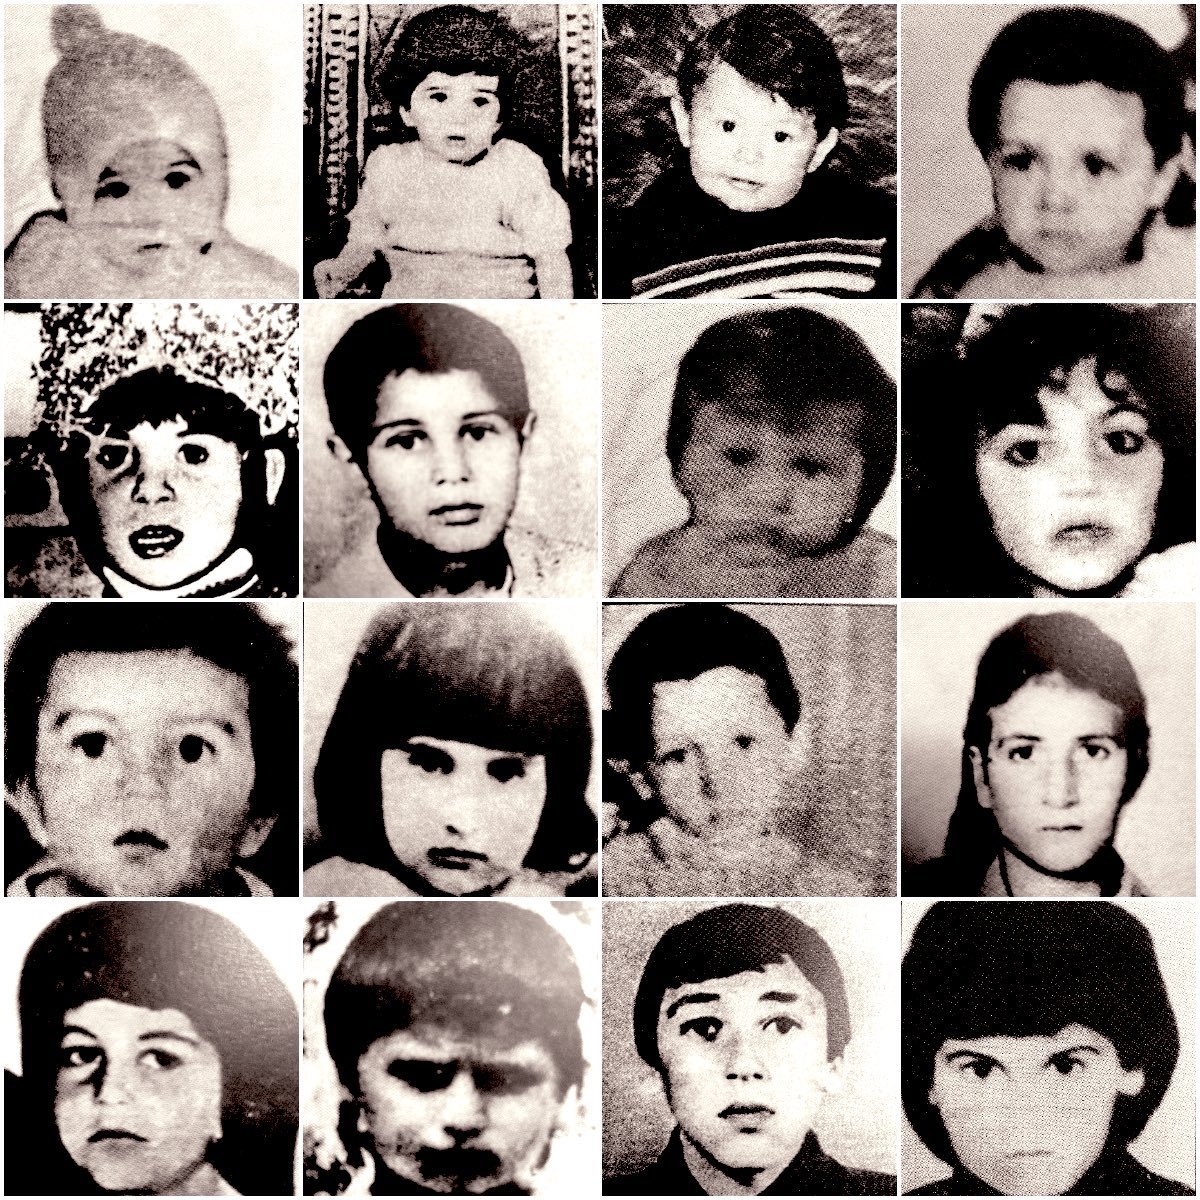 Some of the 63 Azerbaijani children of Khojaly murdered on Feb. 26, 1992 by Armenian troops. #KhojalyGenocide